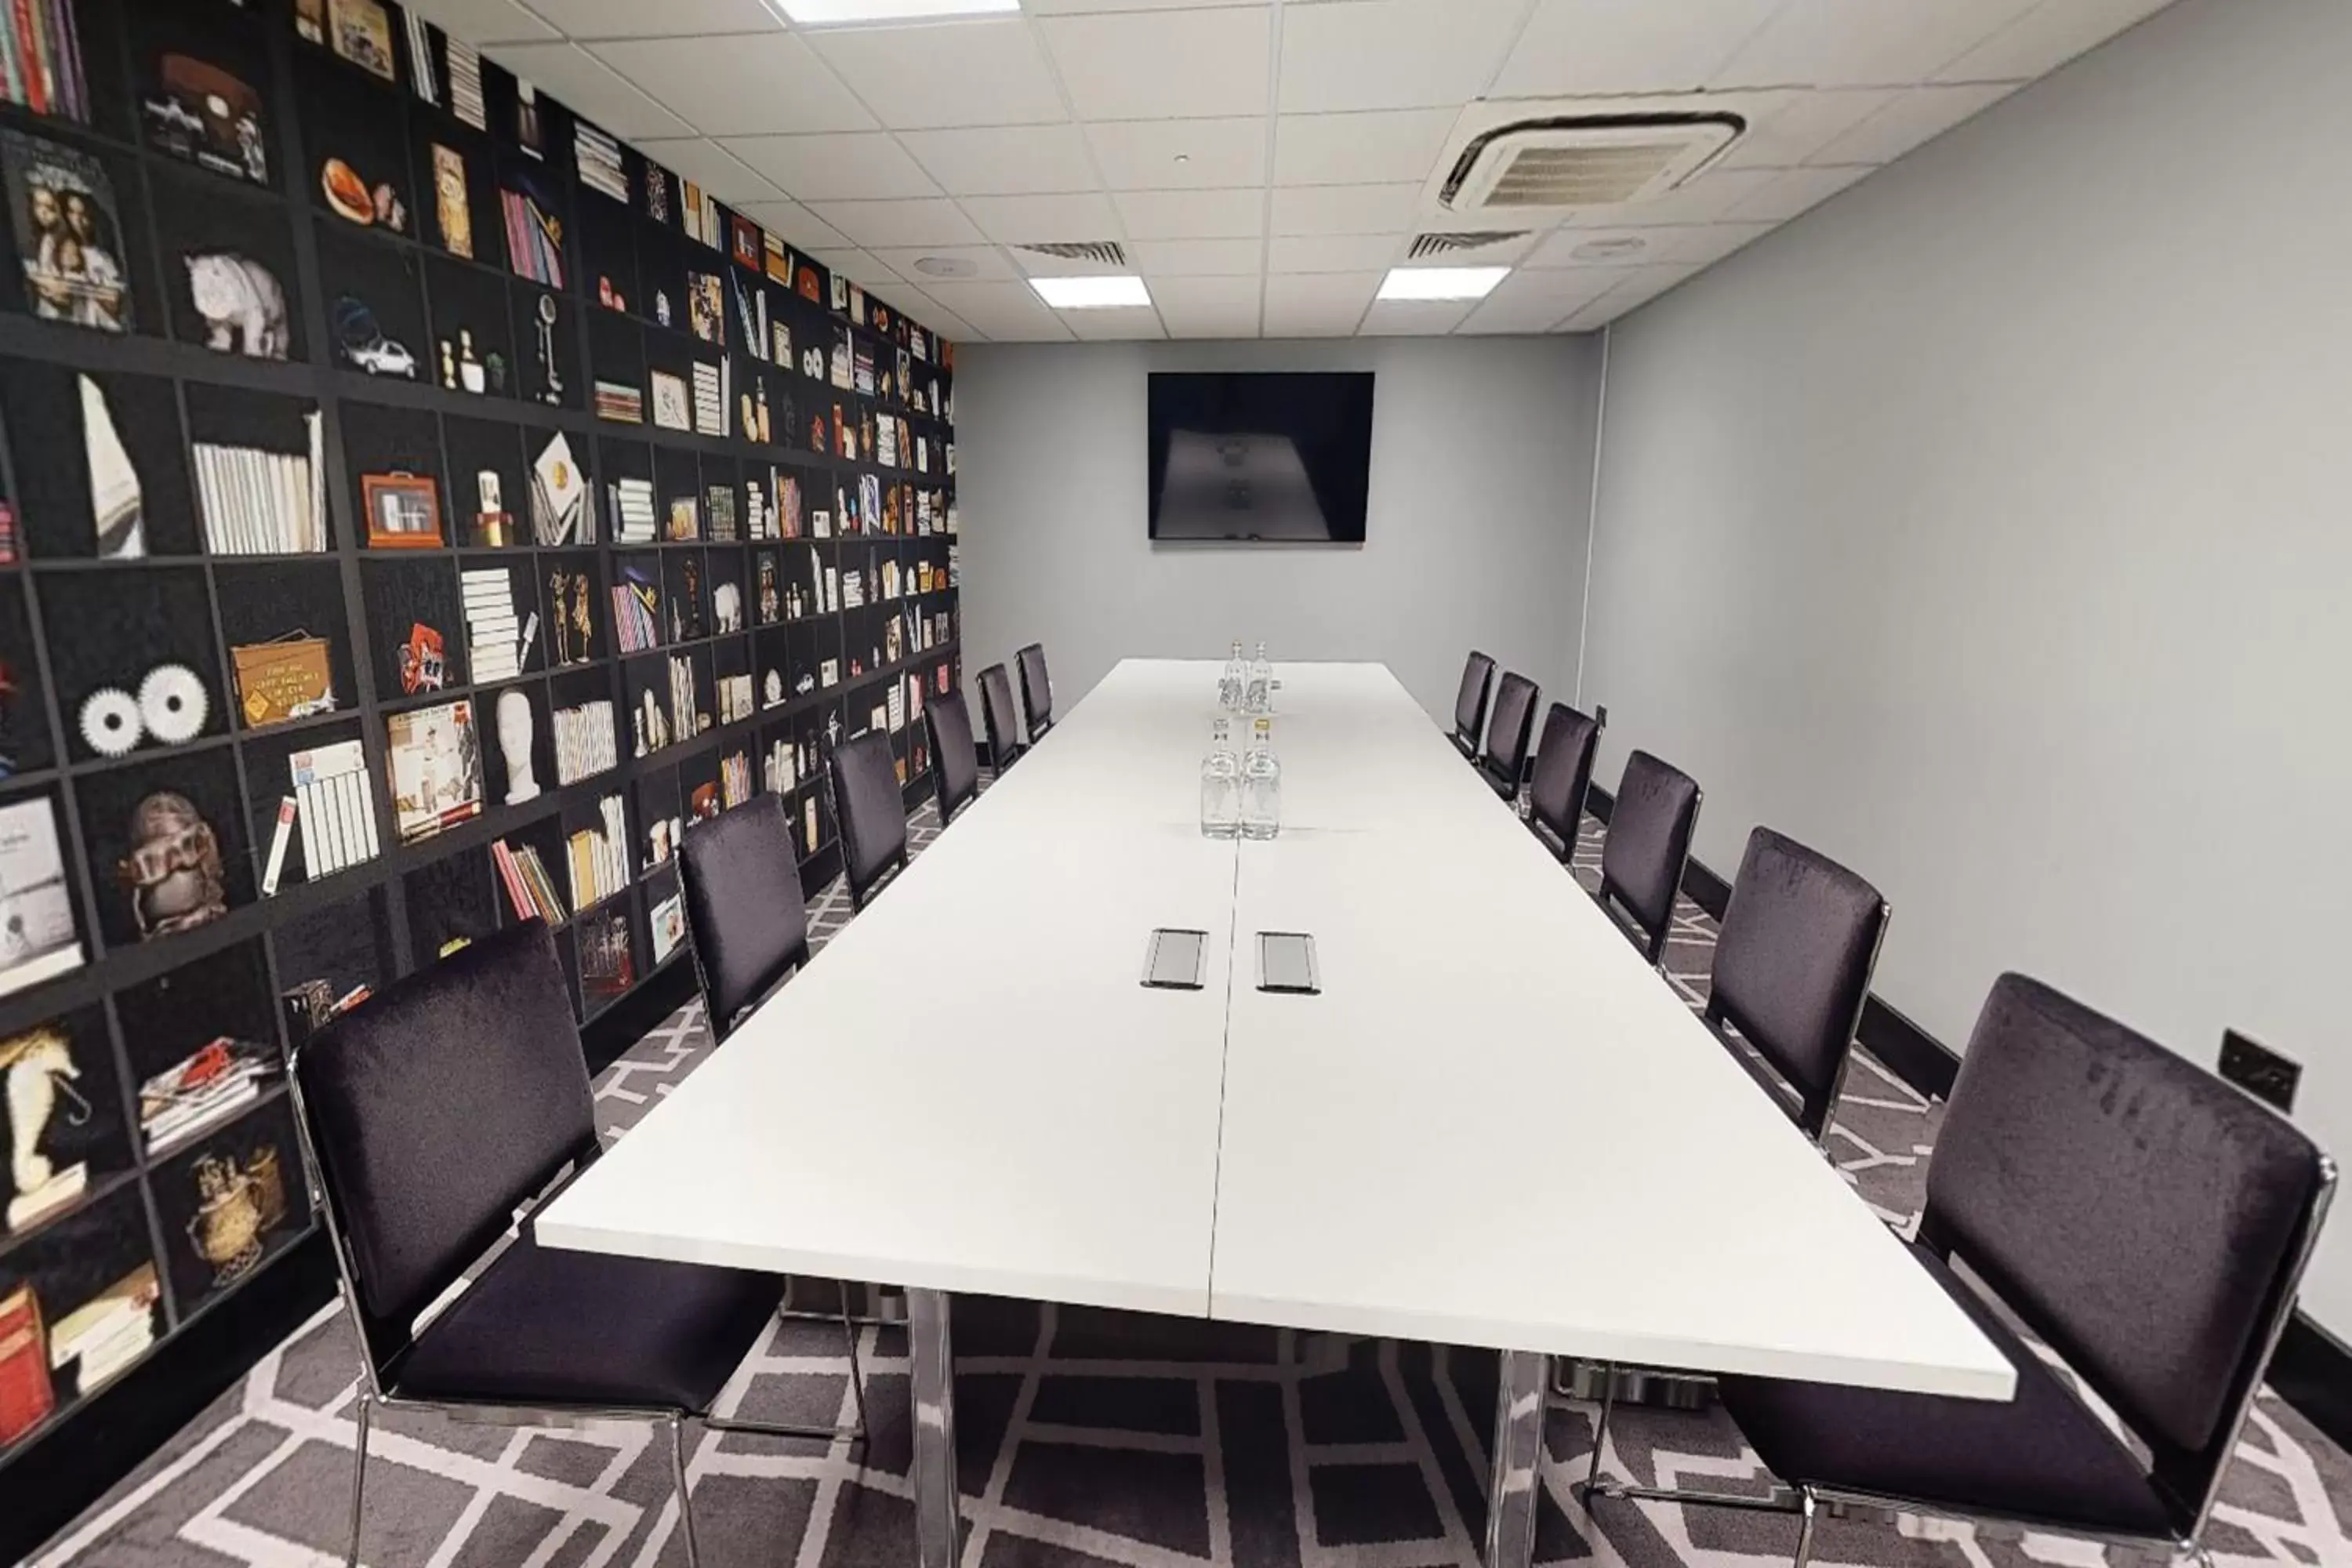 Meeting/conference room in Village Hotel Warrington